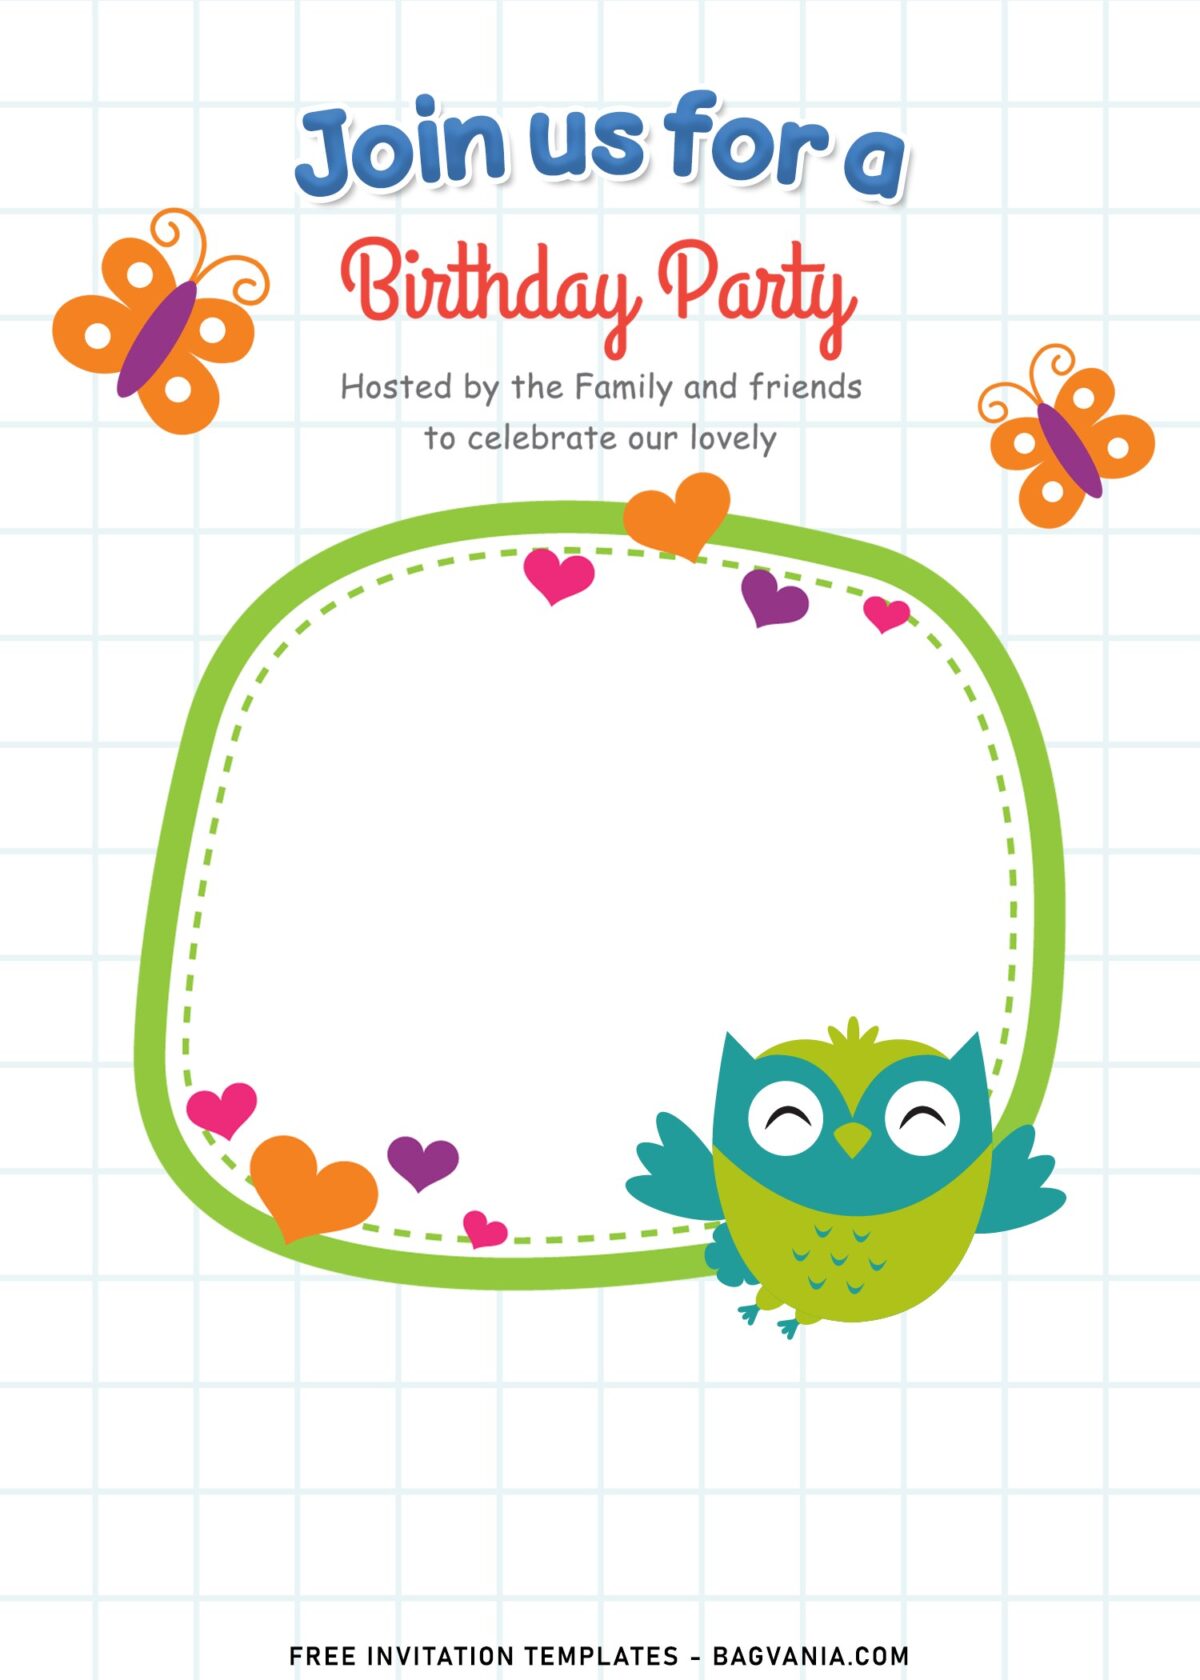 11+ Cute Owl Birthday Invitation Templates For Your Little Ones' Birthday with cute butterflies